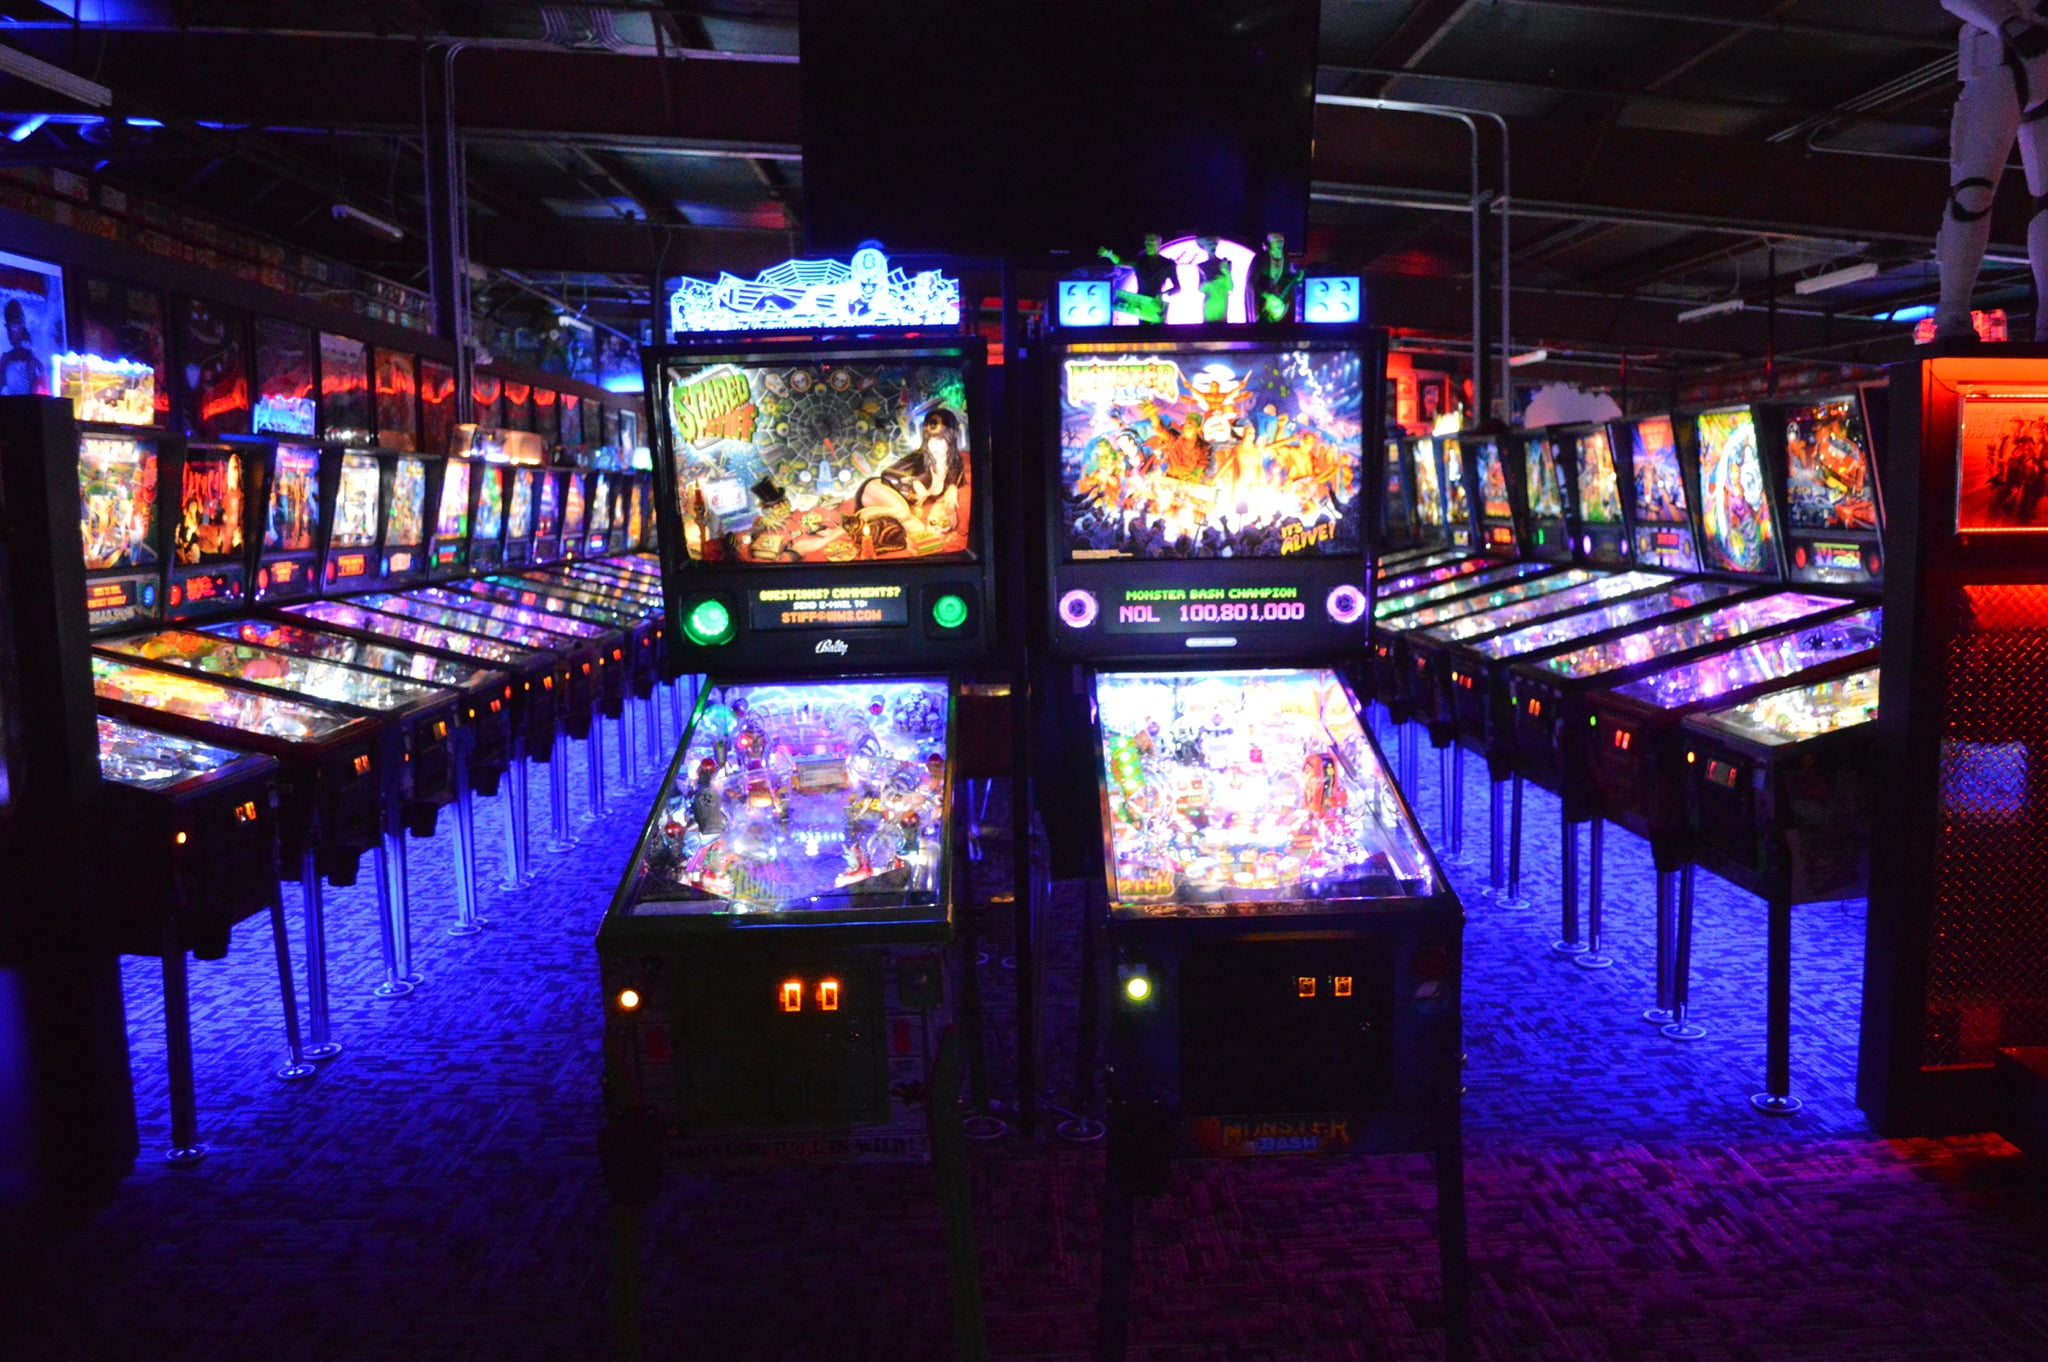 Next Level Pinball: One of World’s Largest Pinball Museums